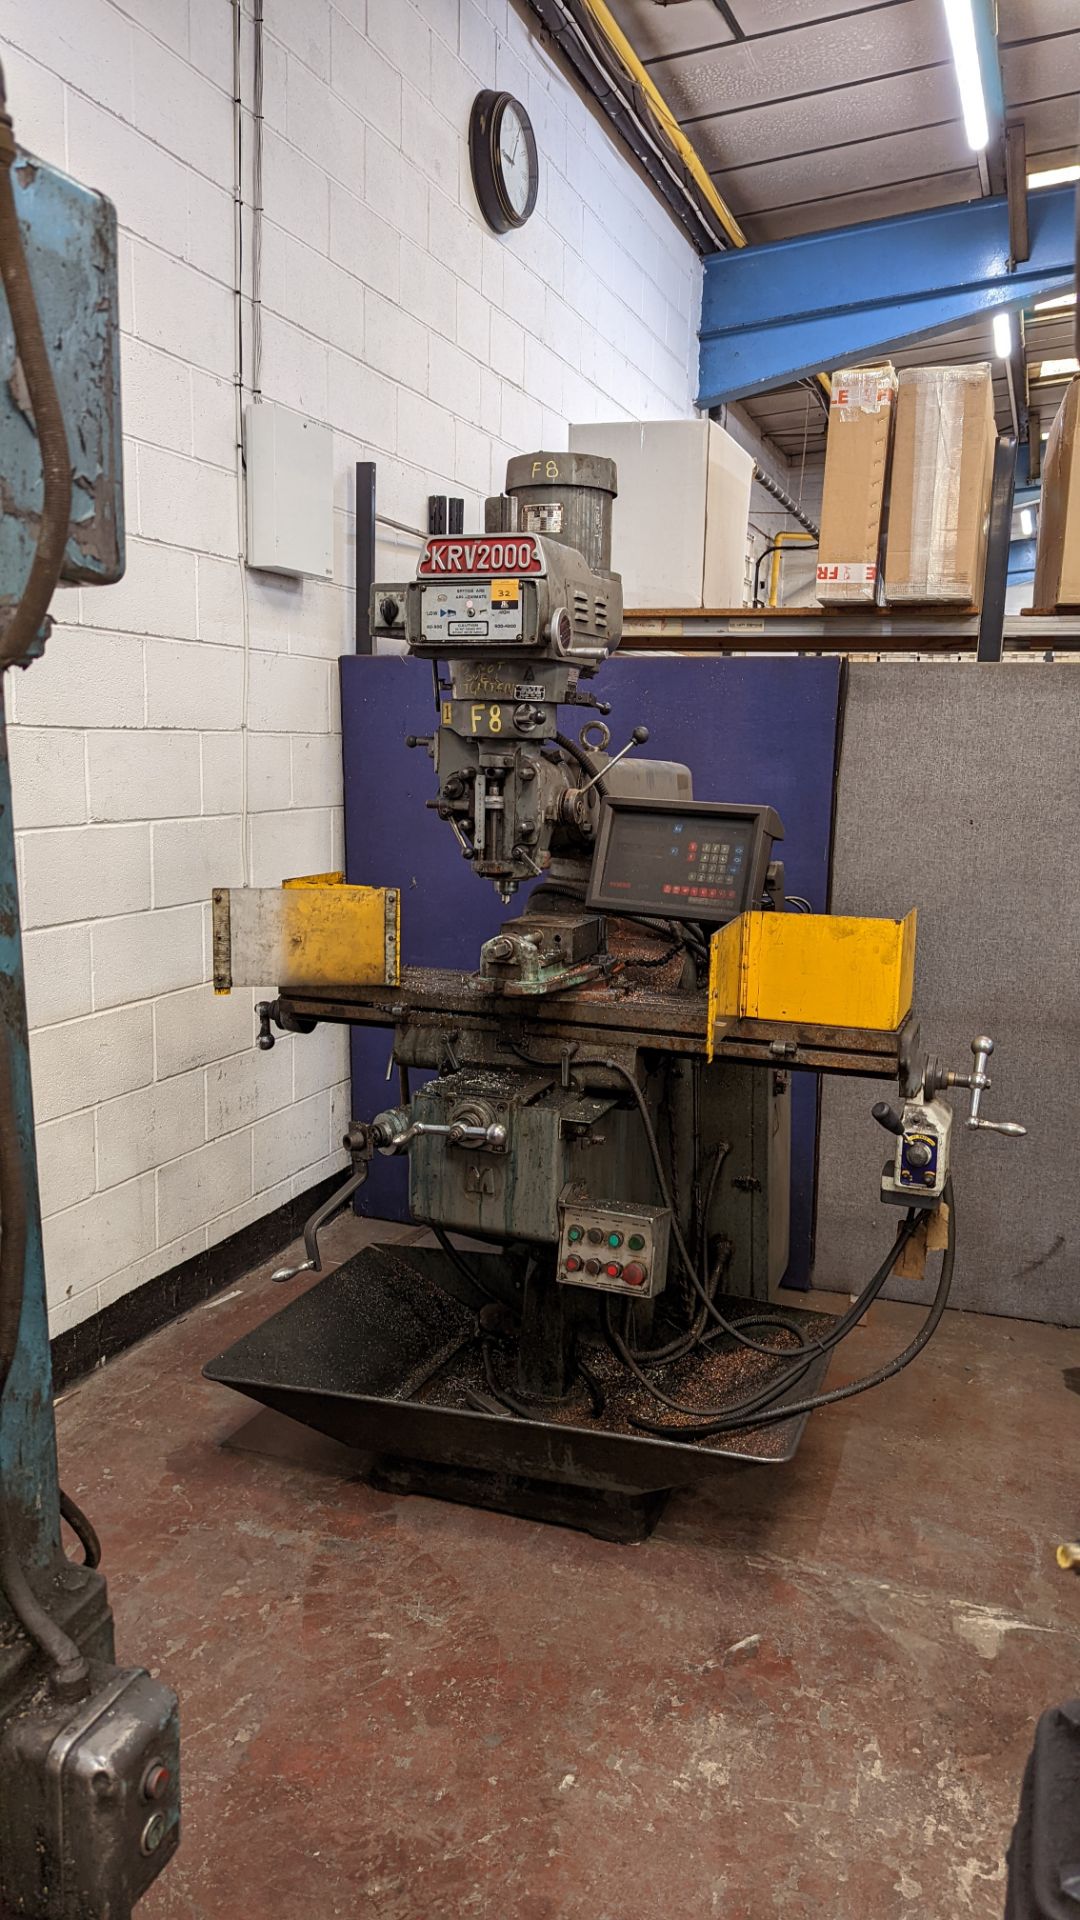 KRV2000 turret milling machine with Newell DP7 DRO & Align CE-500S power feed